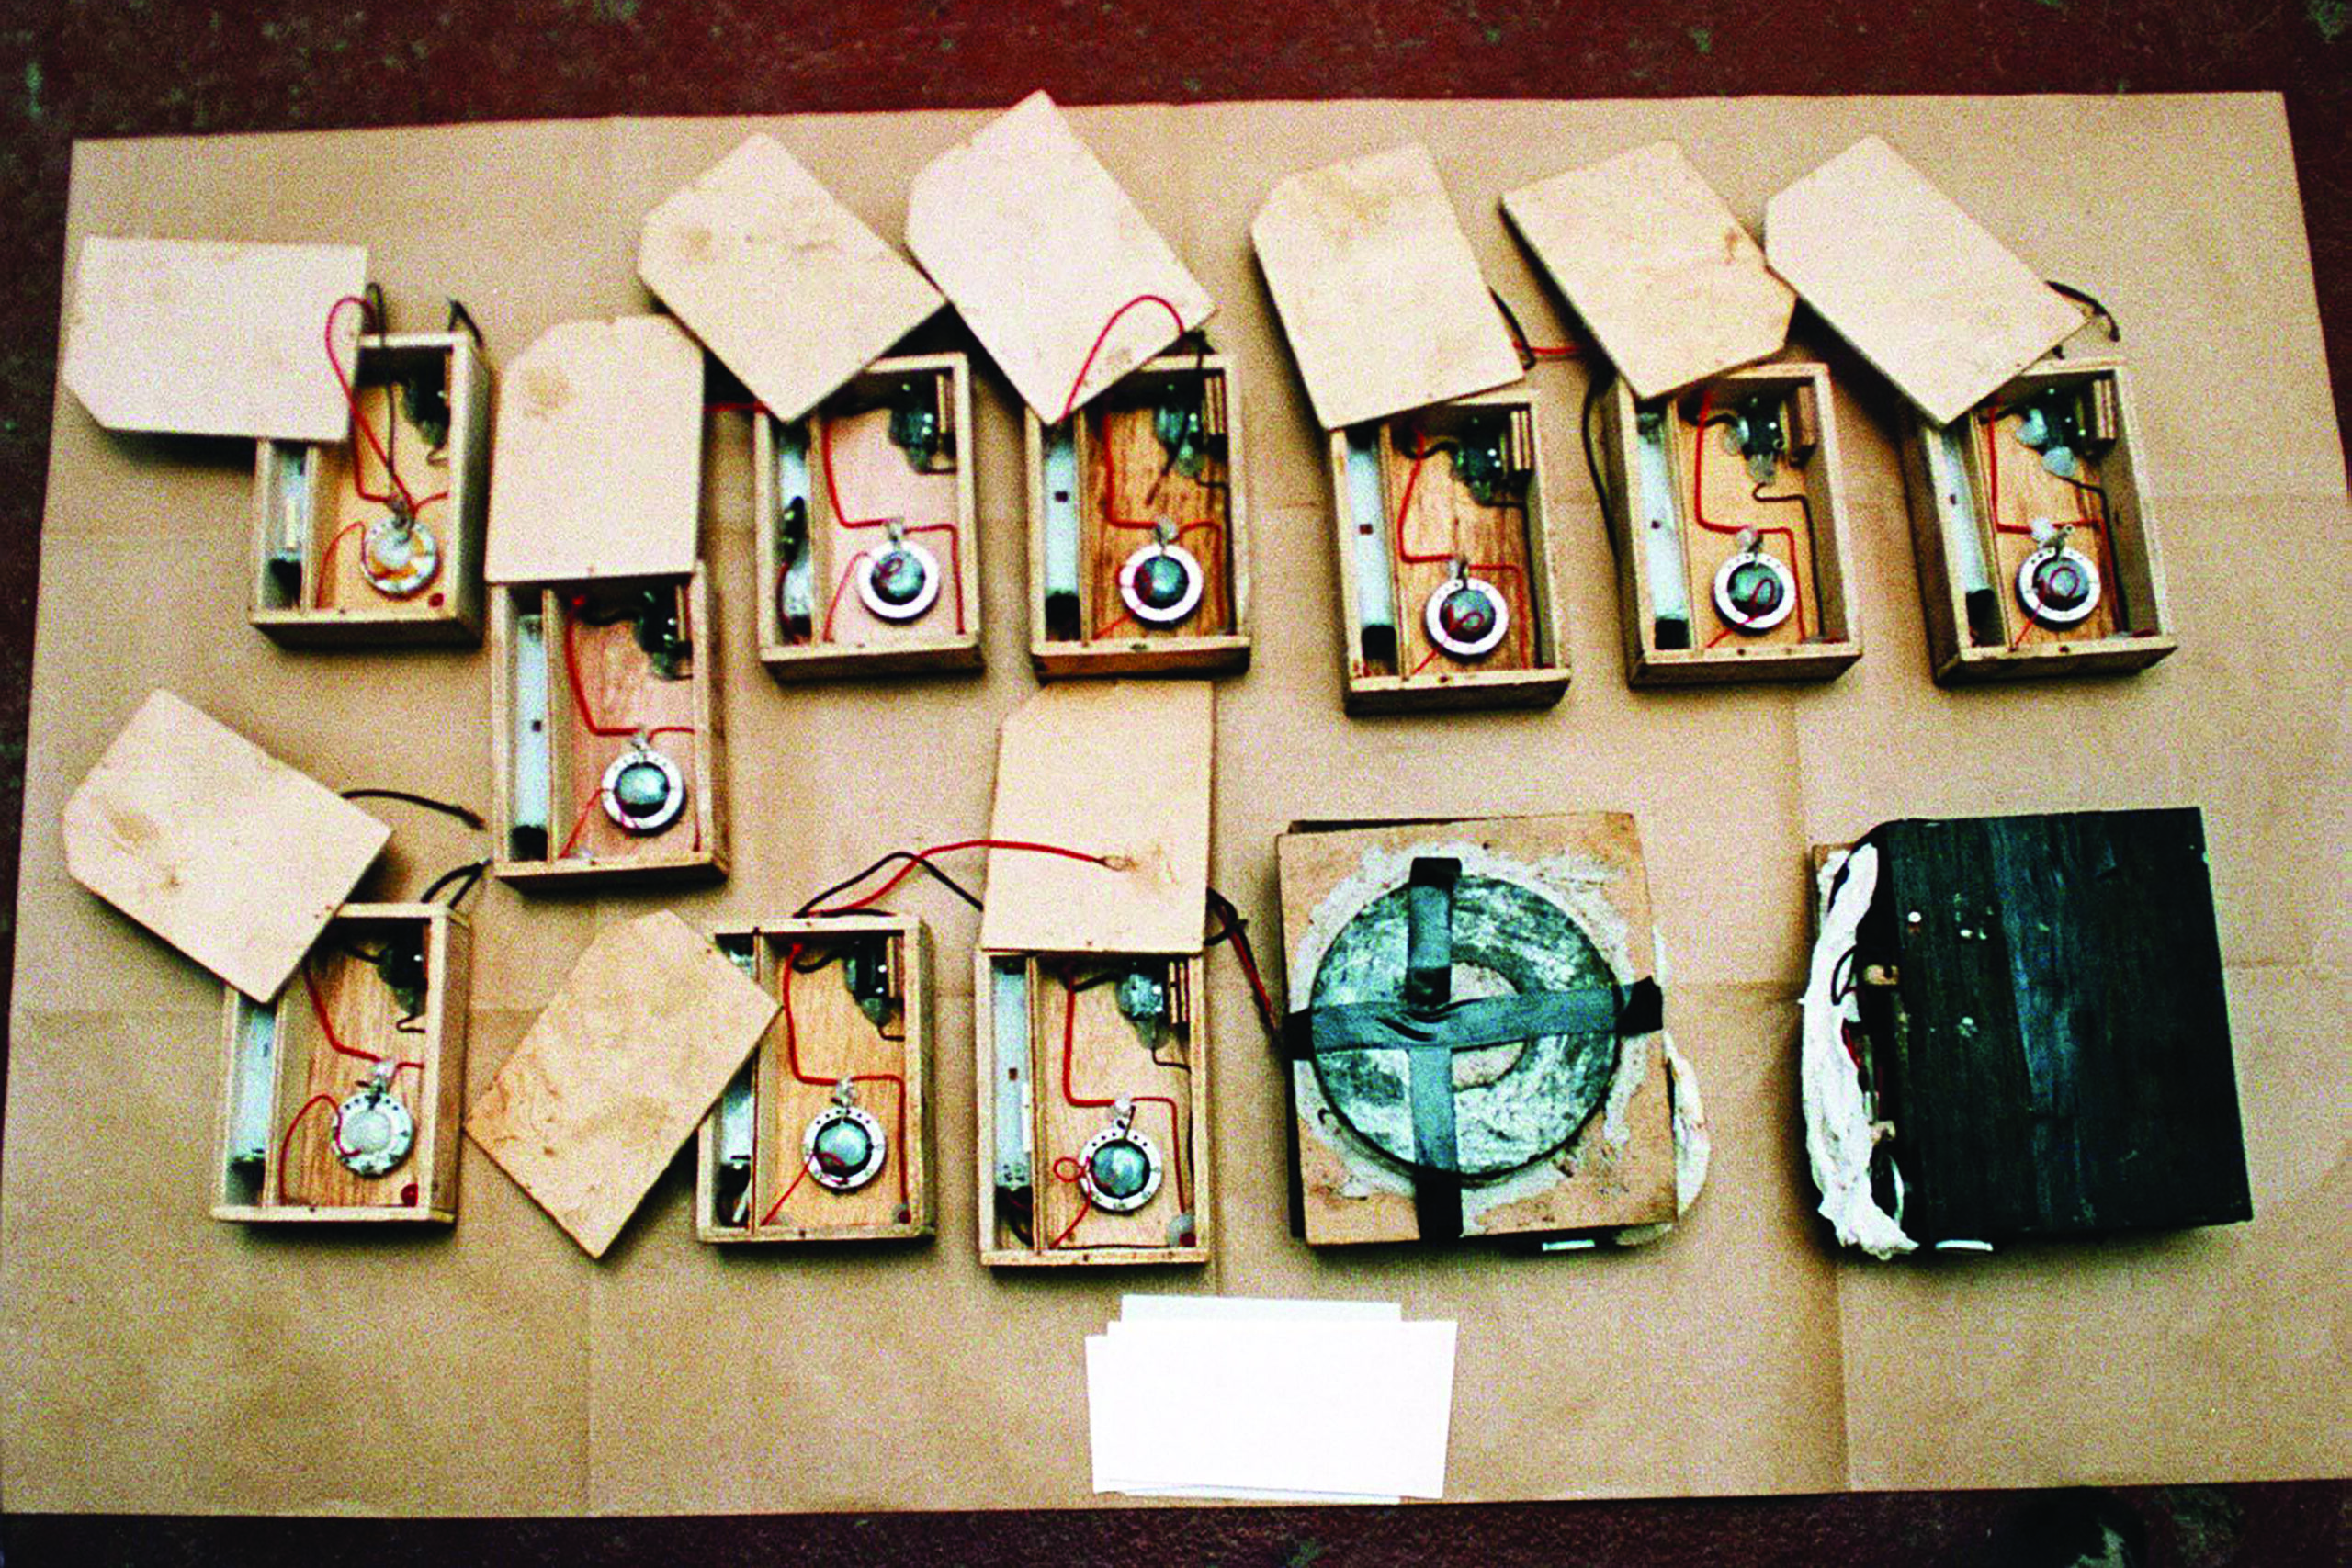 Two rows of Memo Park timers in open wooden boxes, wired for use in IRA bombs.